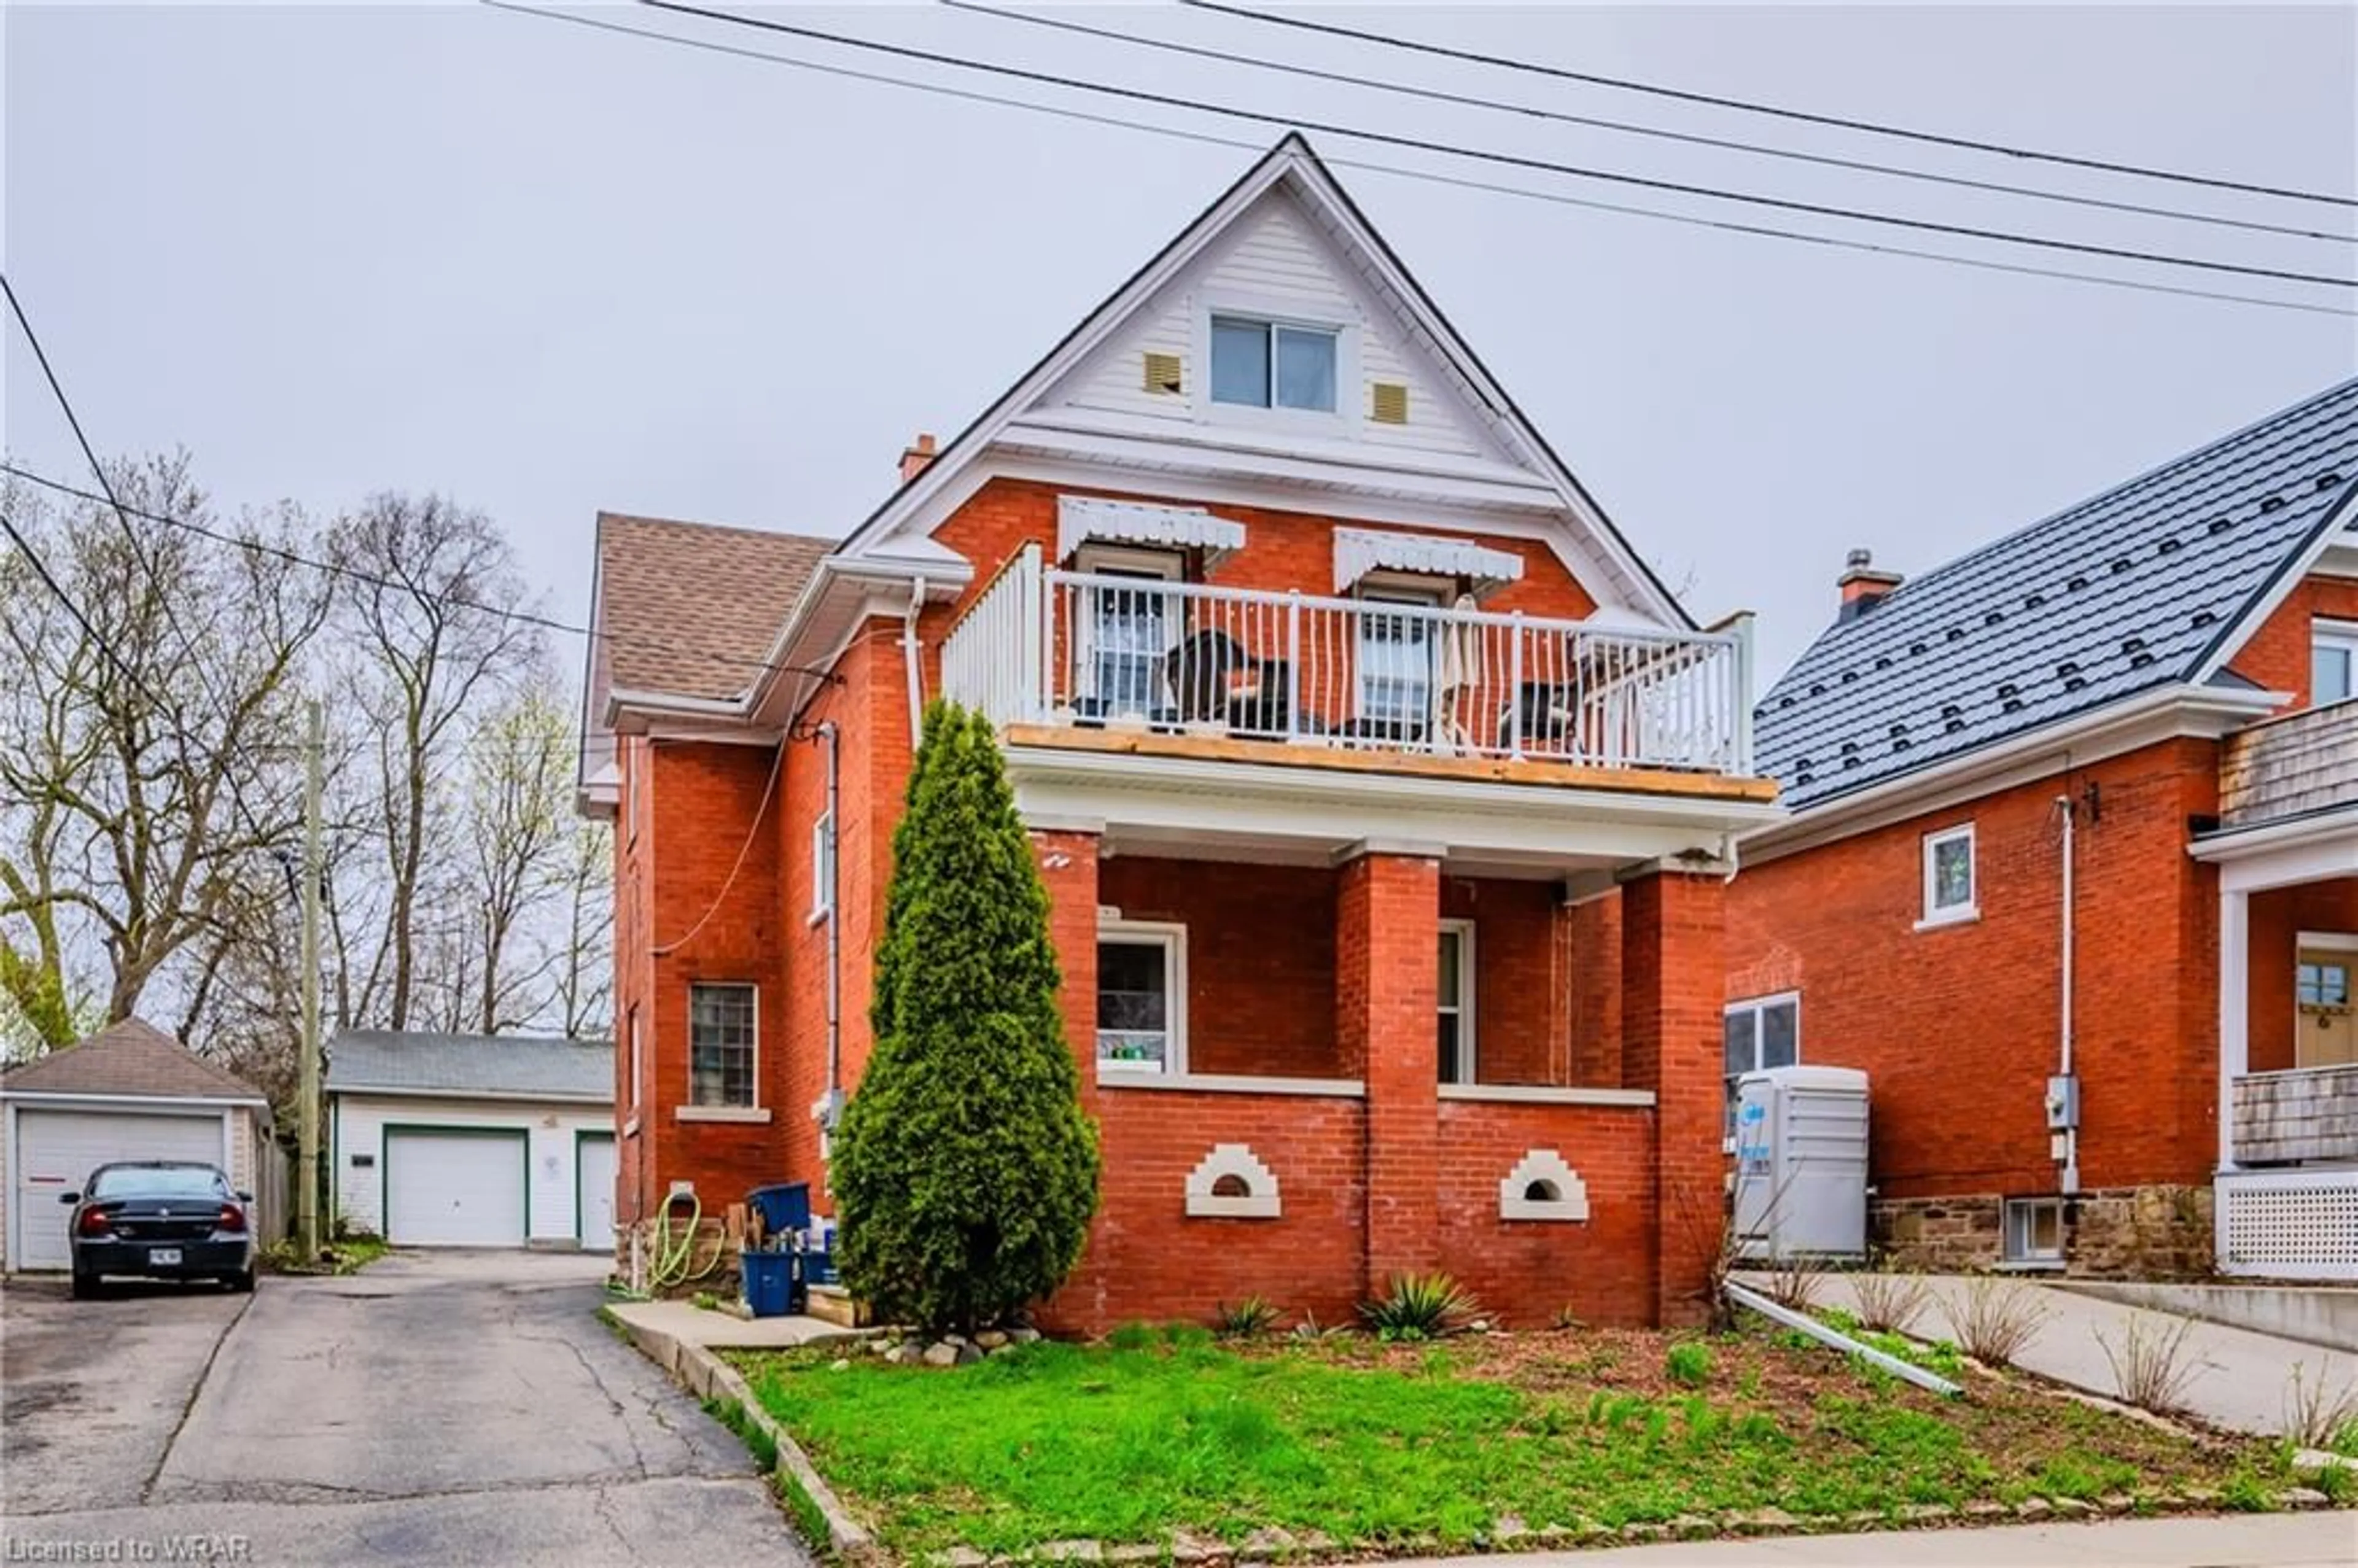 Home with brick exterior material for 284 Duke St, Kitchener Ontario N2H 1B5